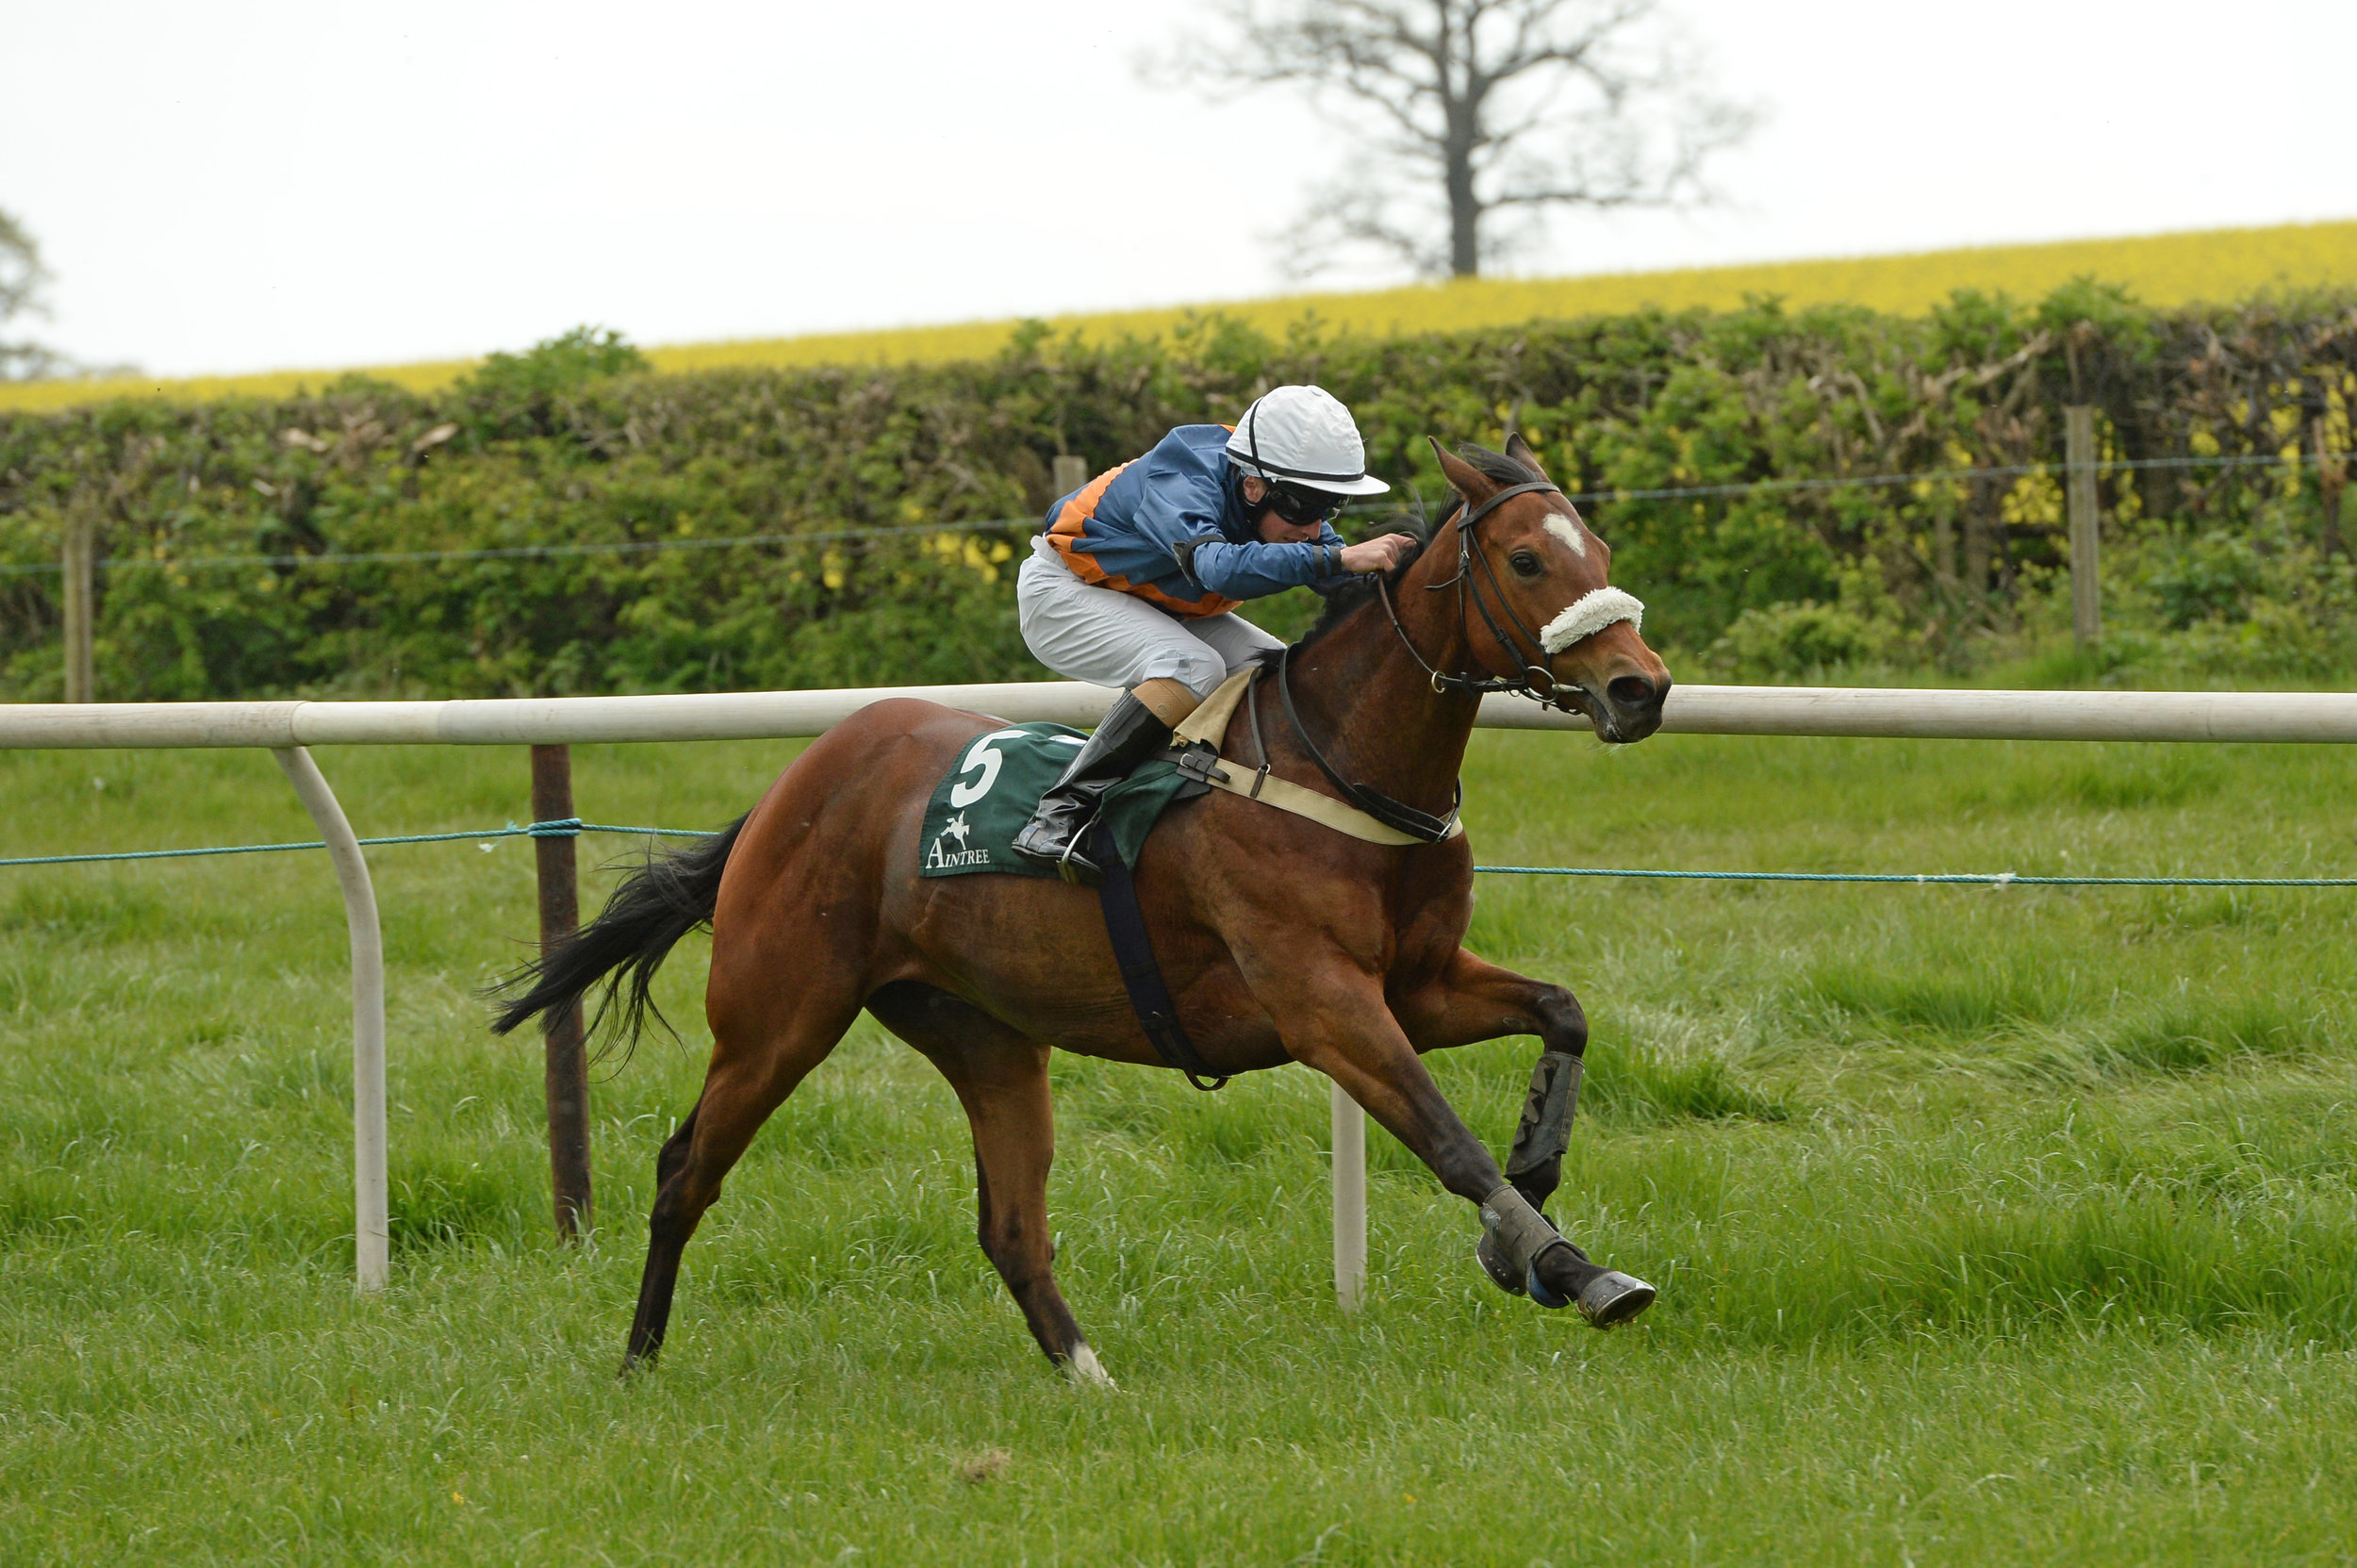 2015 Champion Apprentice, Tom Marquand, started his career pony racing.JPG